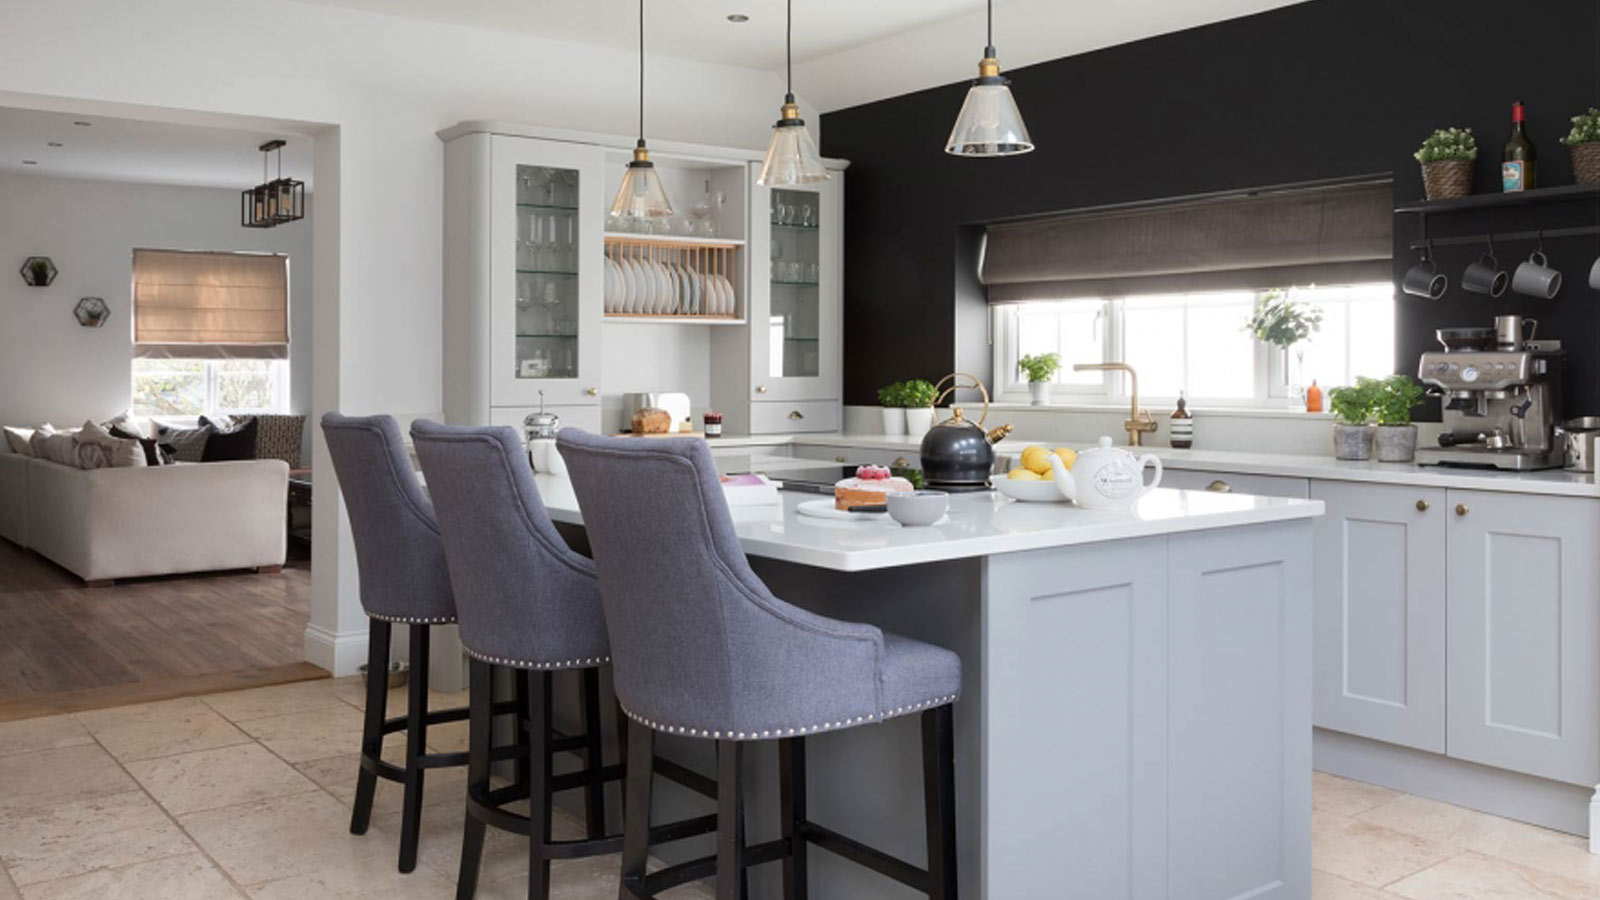 A grey kitchen island with seating in a Shaker kitchen with a dark feature wall